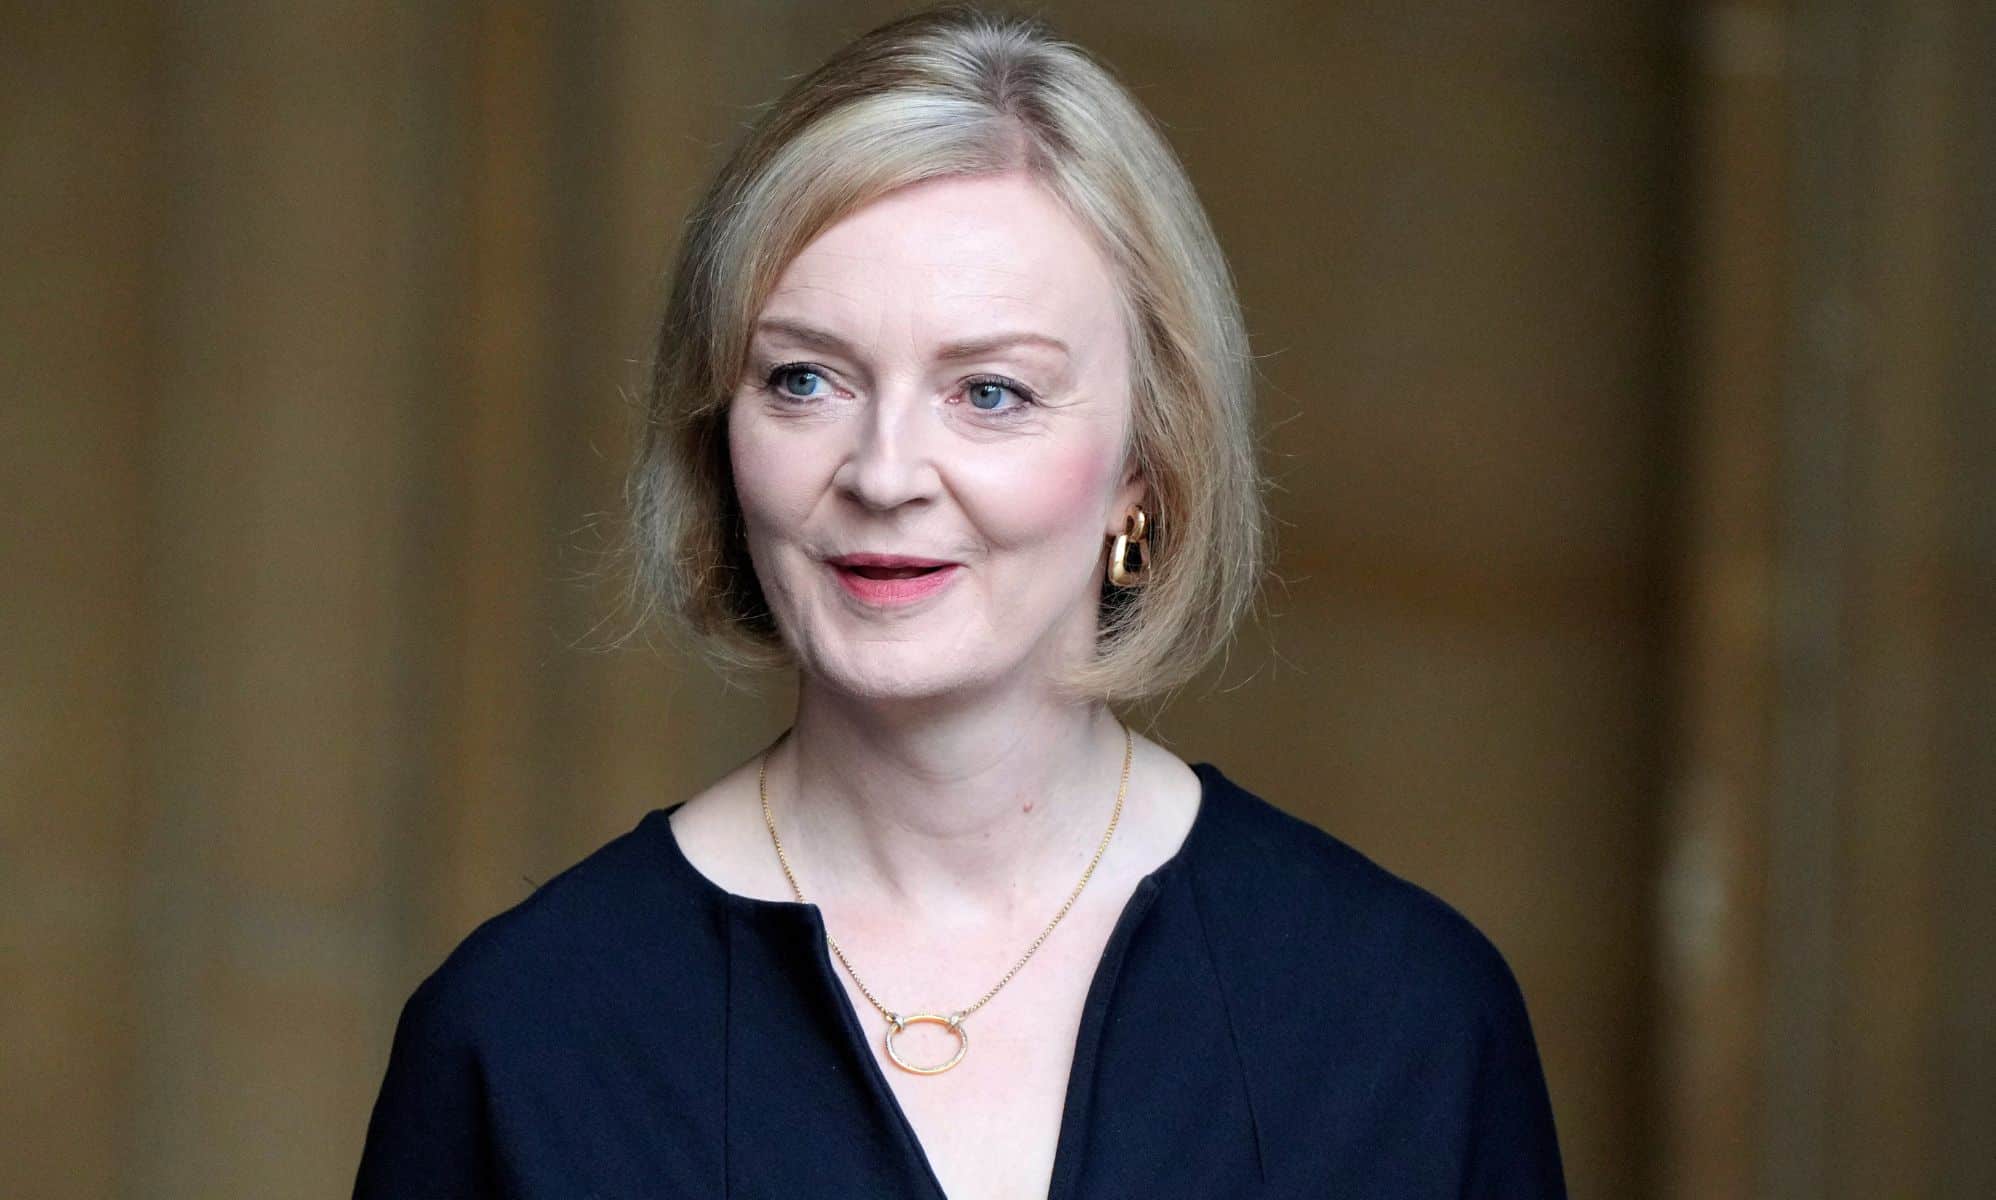 Prime minister Liz Truss is seen wearing a dark blue outfit